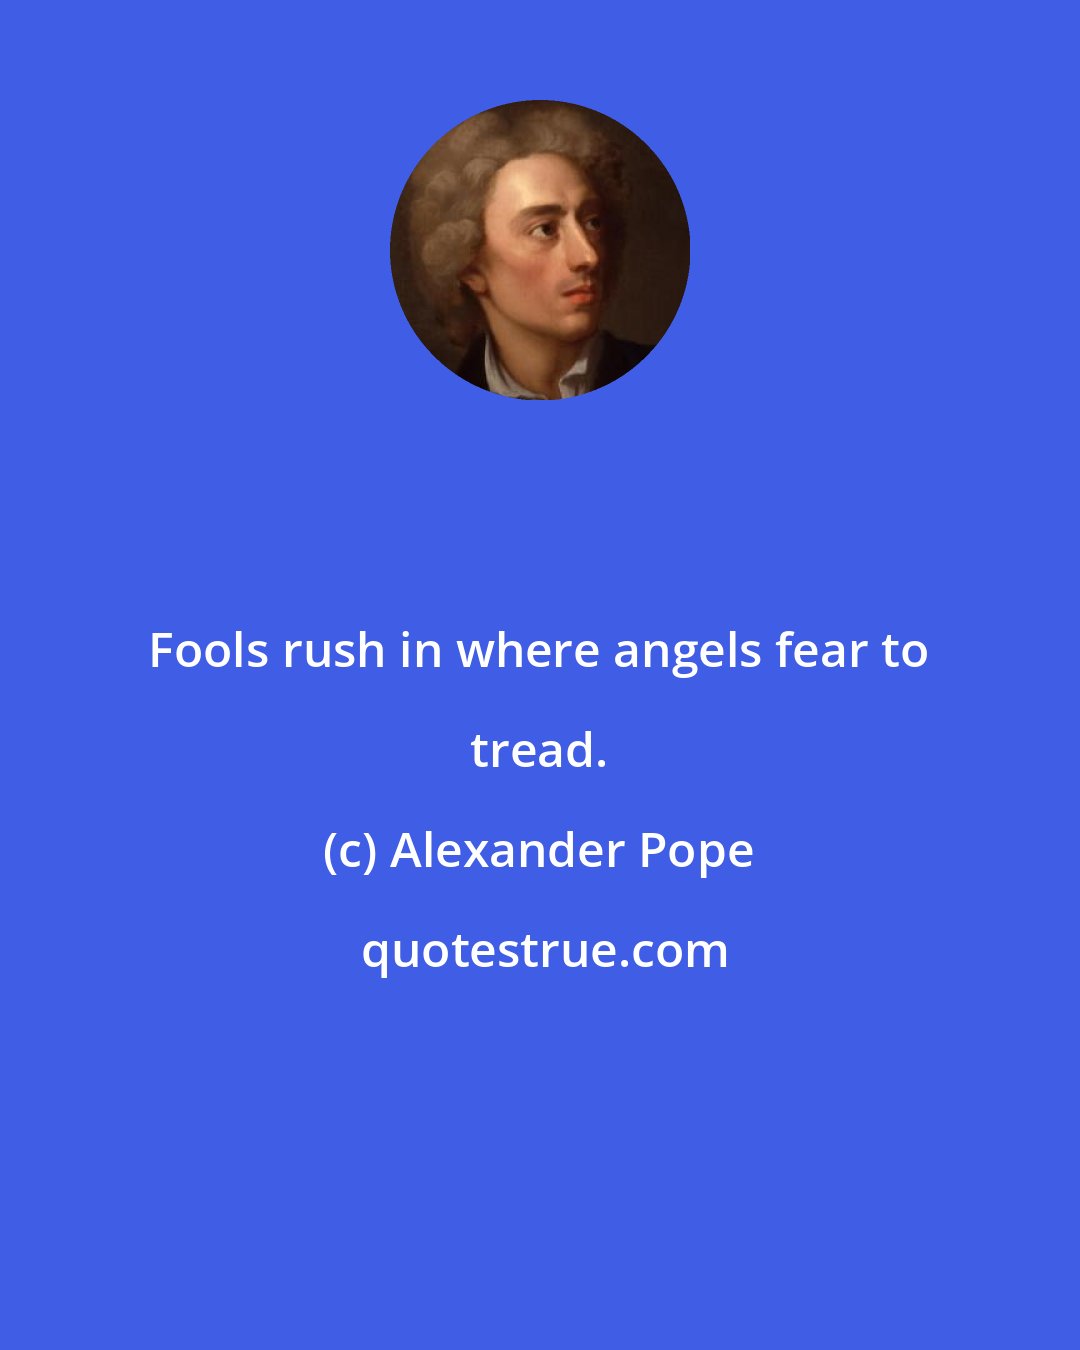 Alexander Pope: Fools rush in where angels fear to tread.